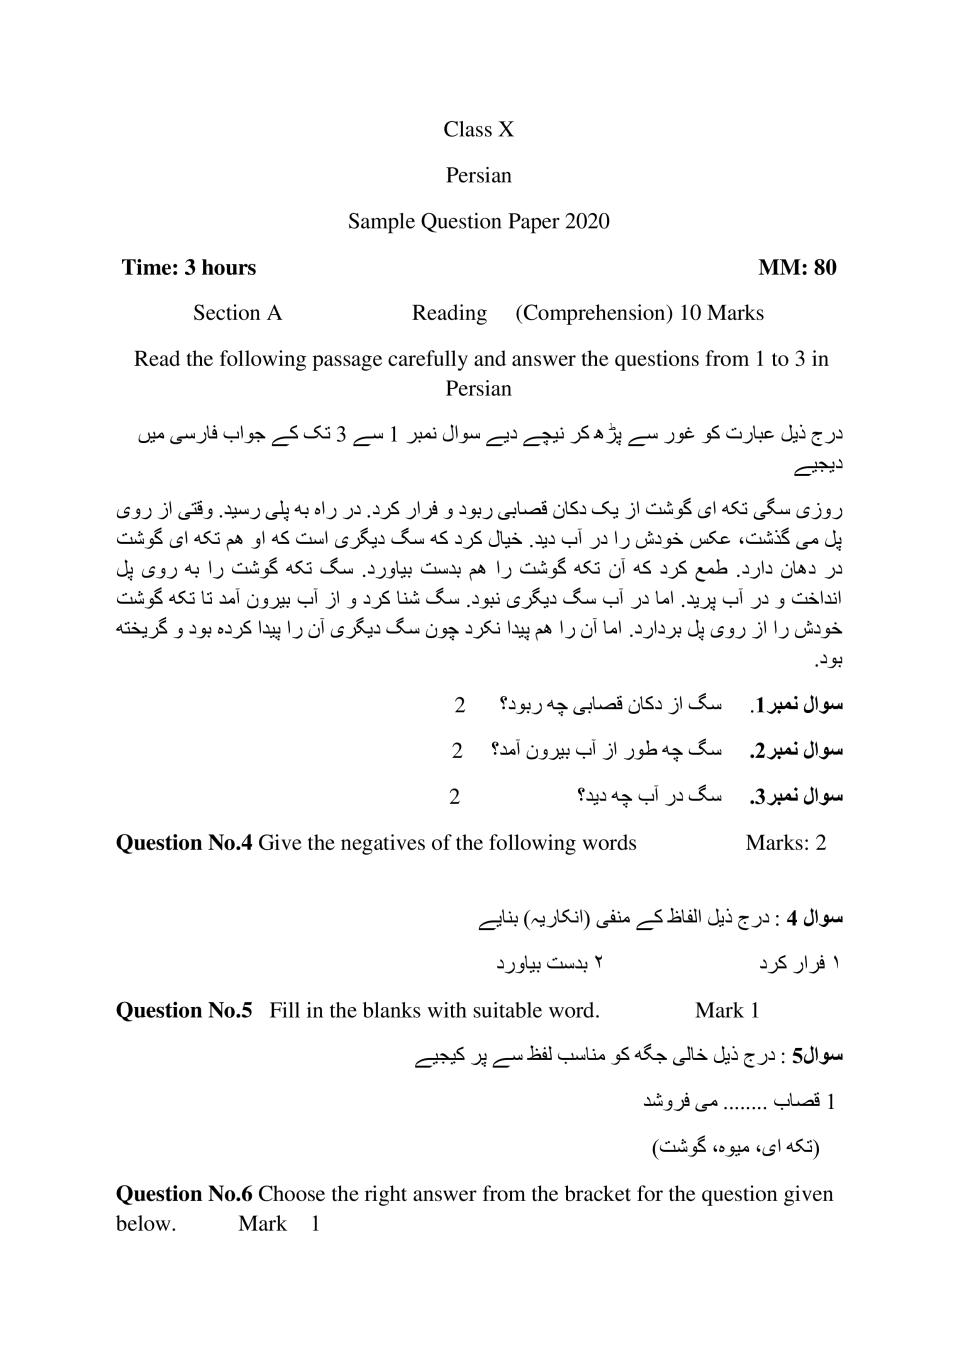 CBSE Class 10 Sample Paper 2020 for Persian - Page 1